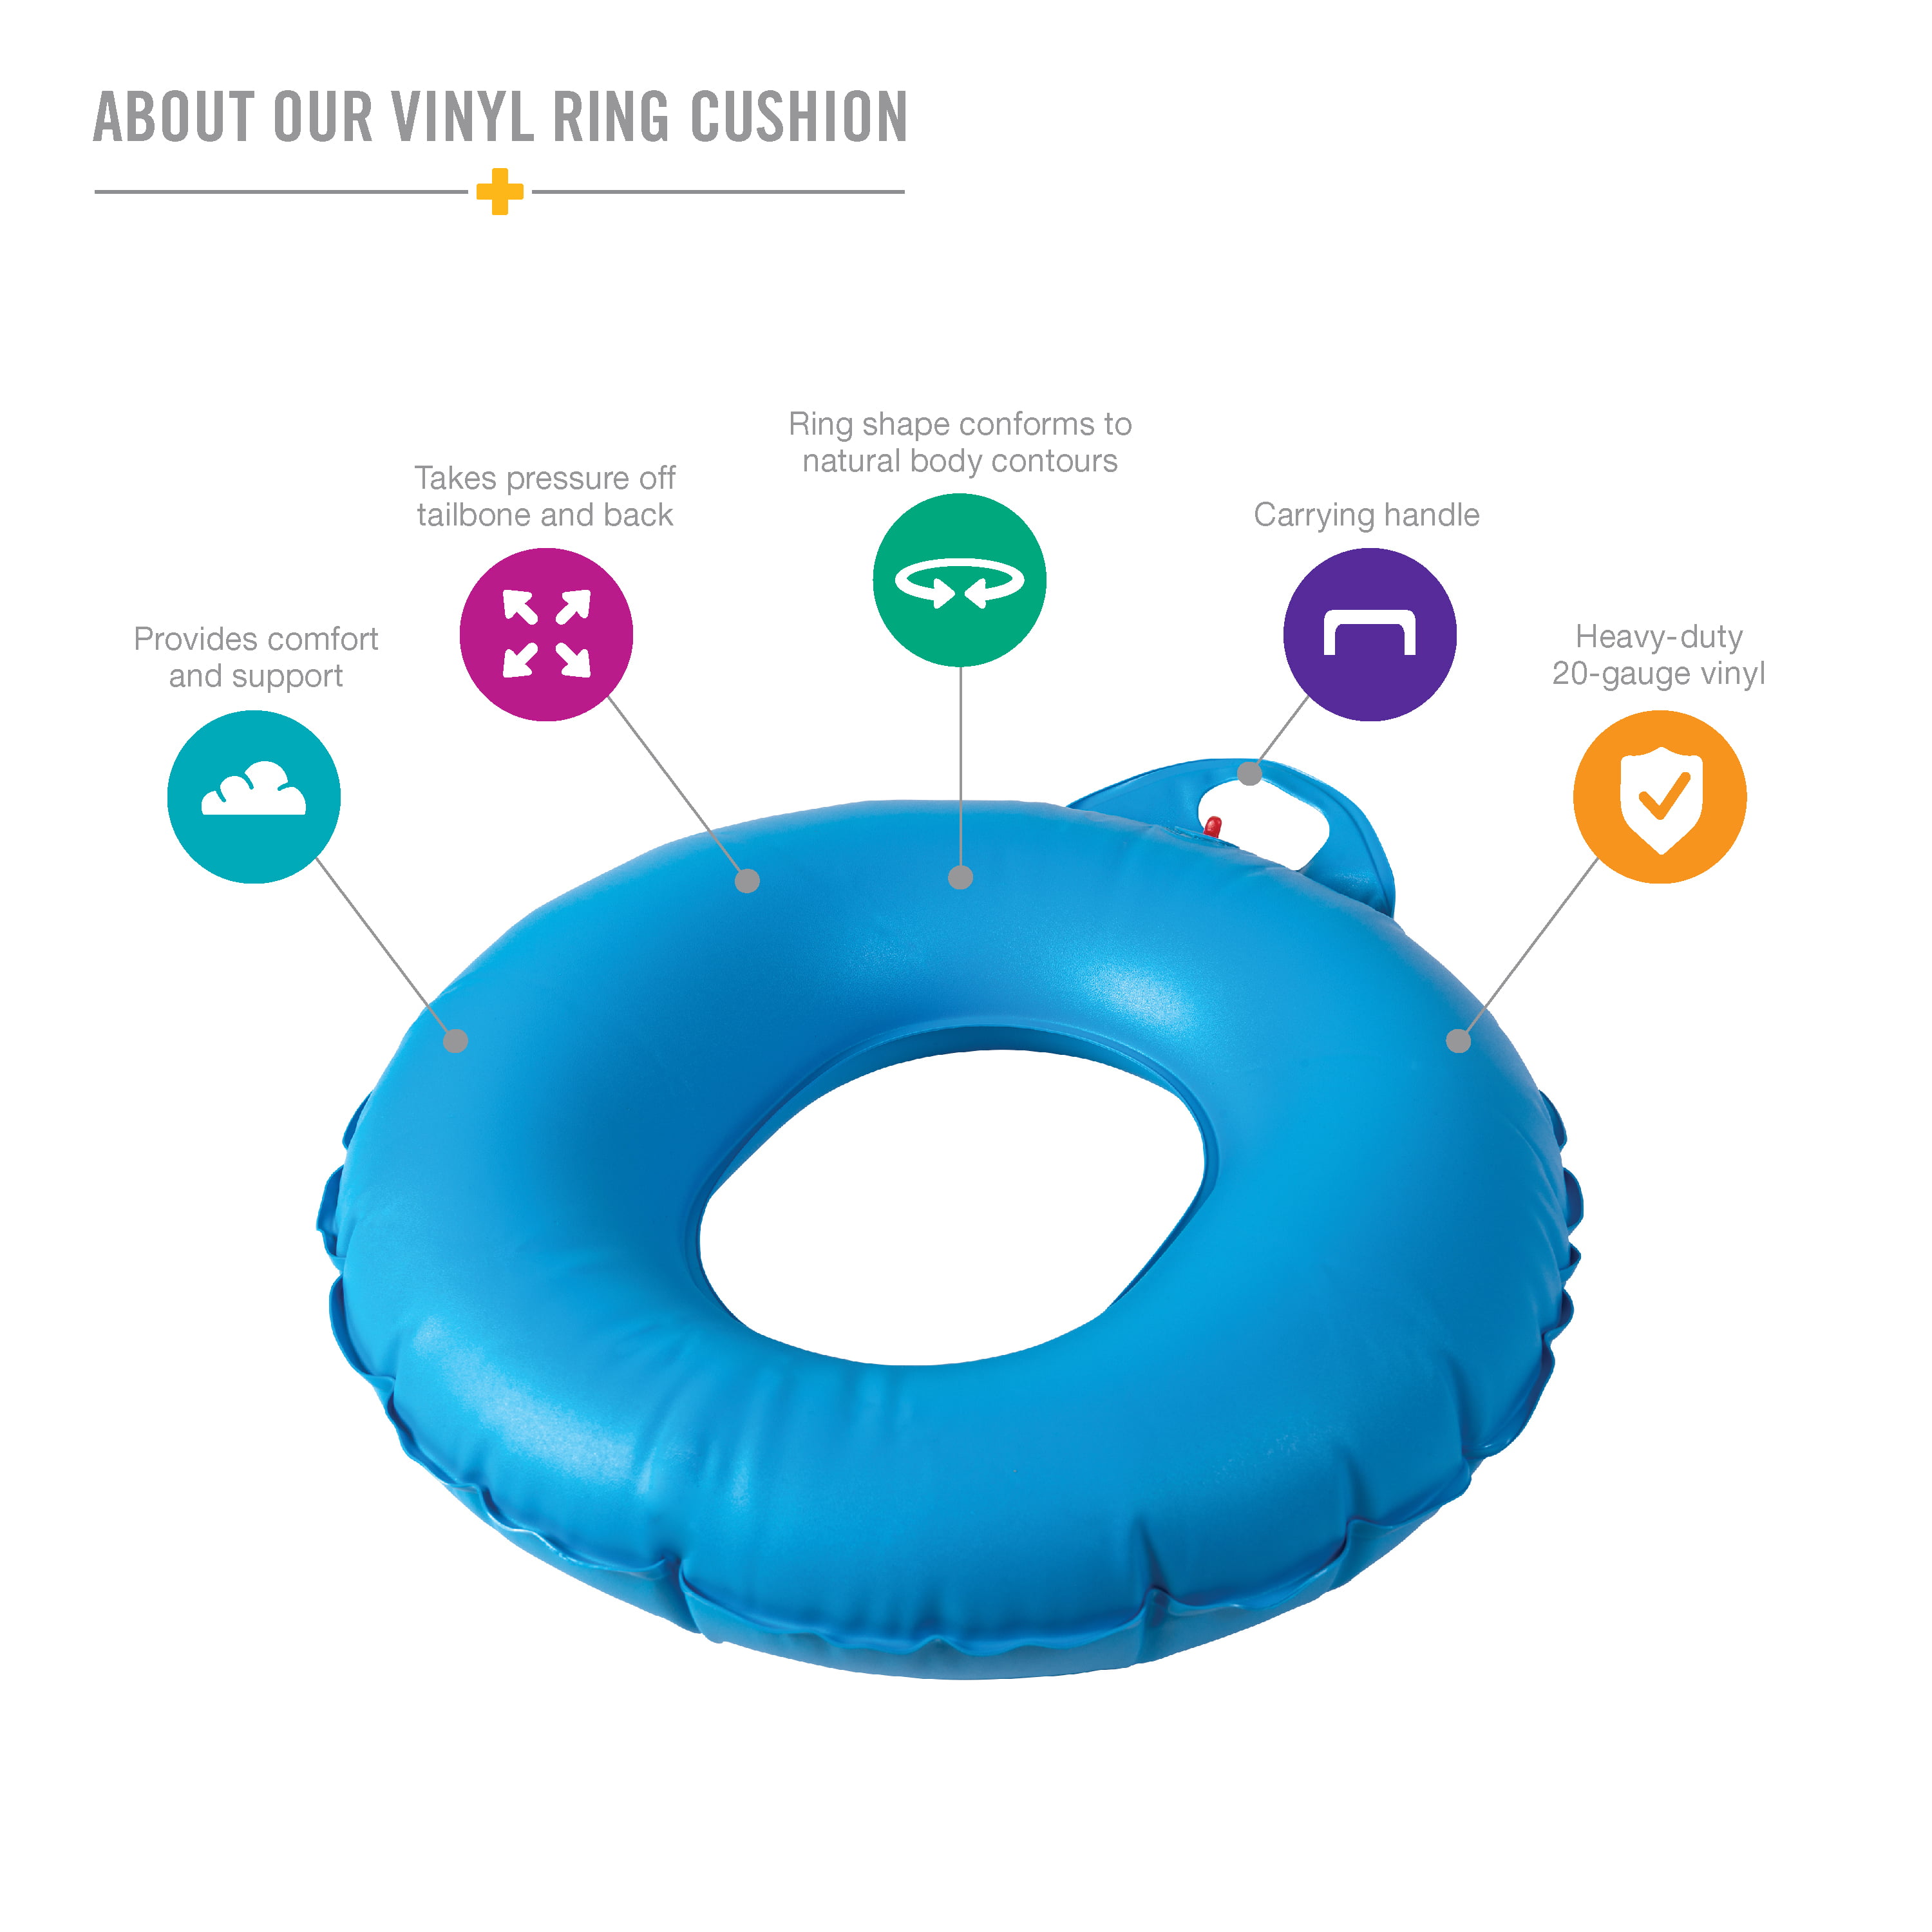 Minicloss Inflatable Donut Cushion, Elderly Nursing Anti-Bedsore Seat Pad Hemorrhoids  Seat Pillow, Tailbone Pain, for Wheelchairs Toilet Chair for Home, Car,  Office 